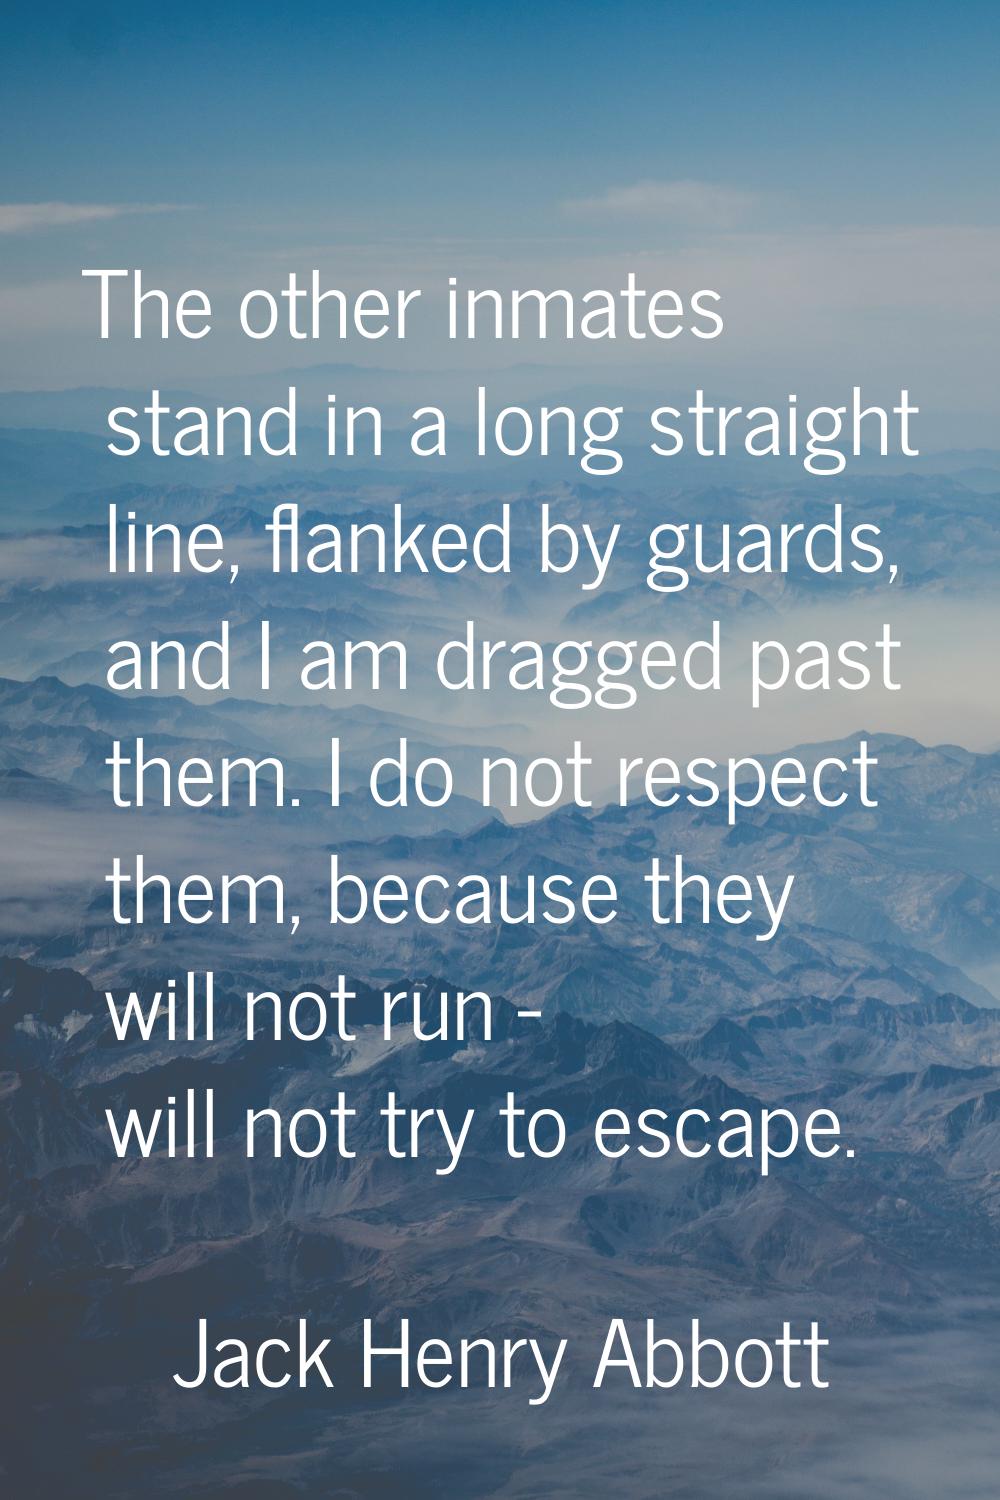 The other inmates stand in a long straight line, flanked by guards, and I am dragged past them. I d